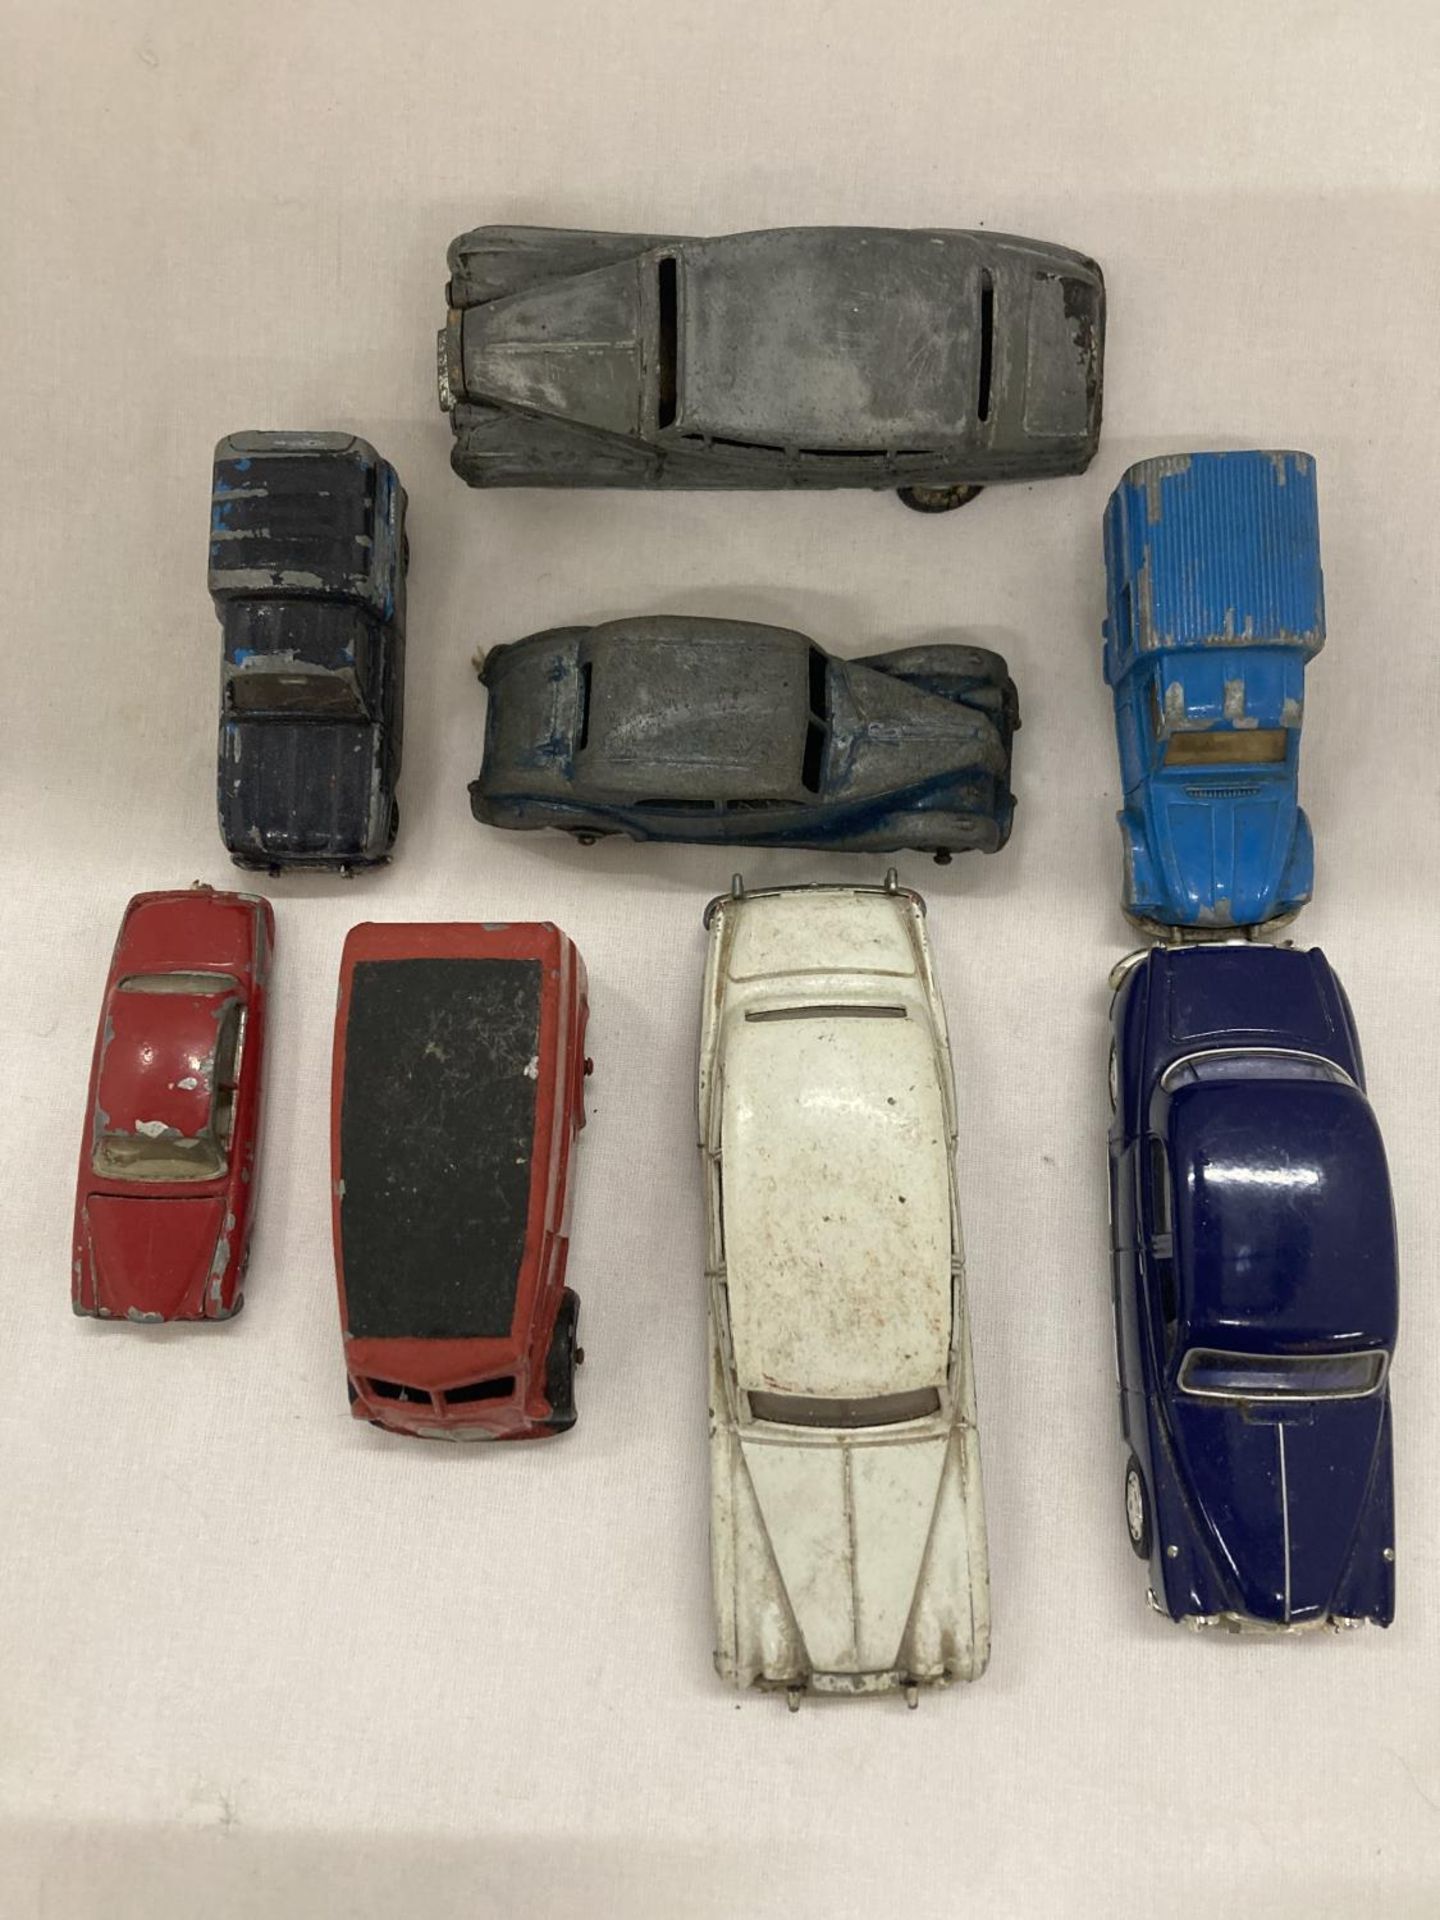 A COLLECTION OF VINTAGE DIE-CAST CARS TO INCLUDE DINKY TOYS - 8 IN TOTAL